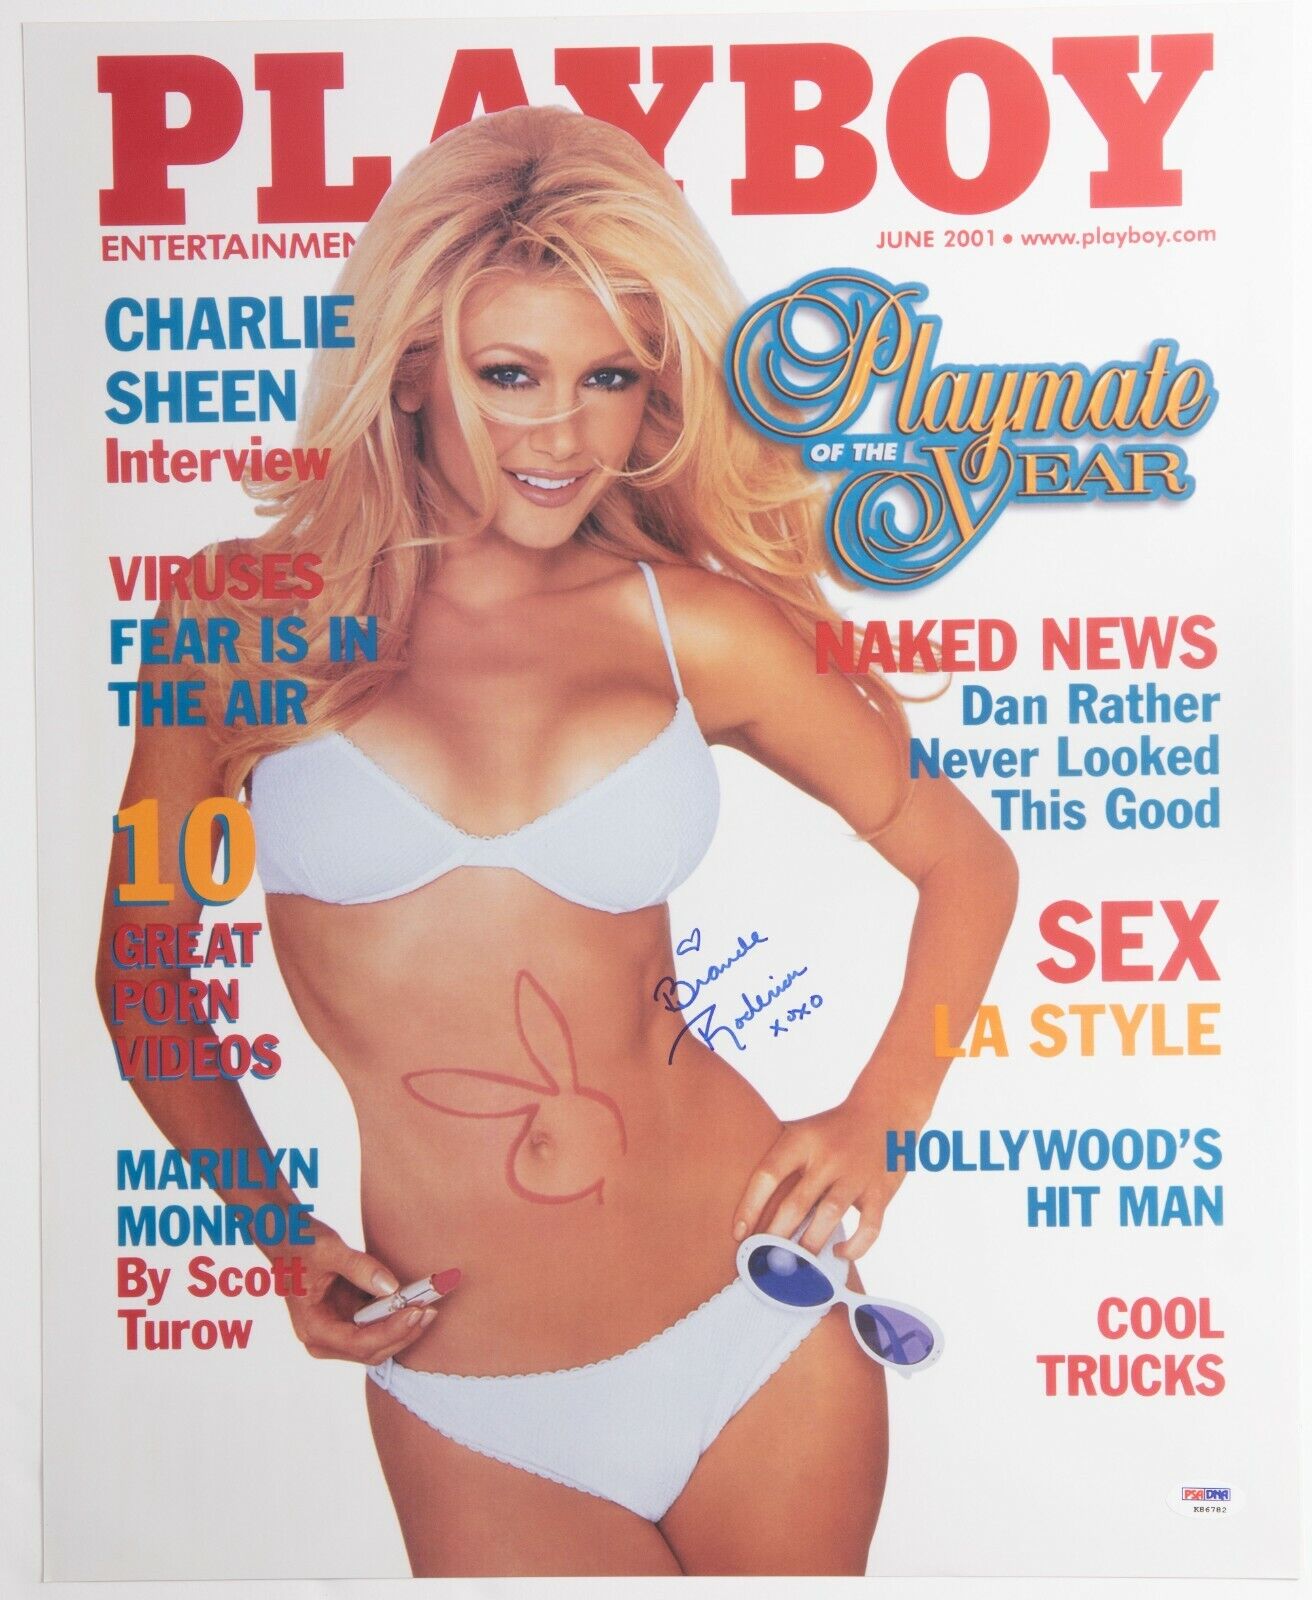 Brande Roderick Signed Playboy 16x20 Photo Poster painting PSA/DNA COA Poster Auto'd June 2001